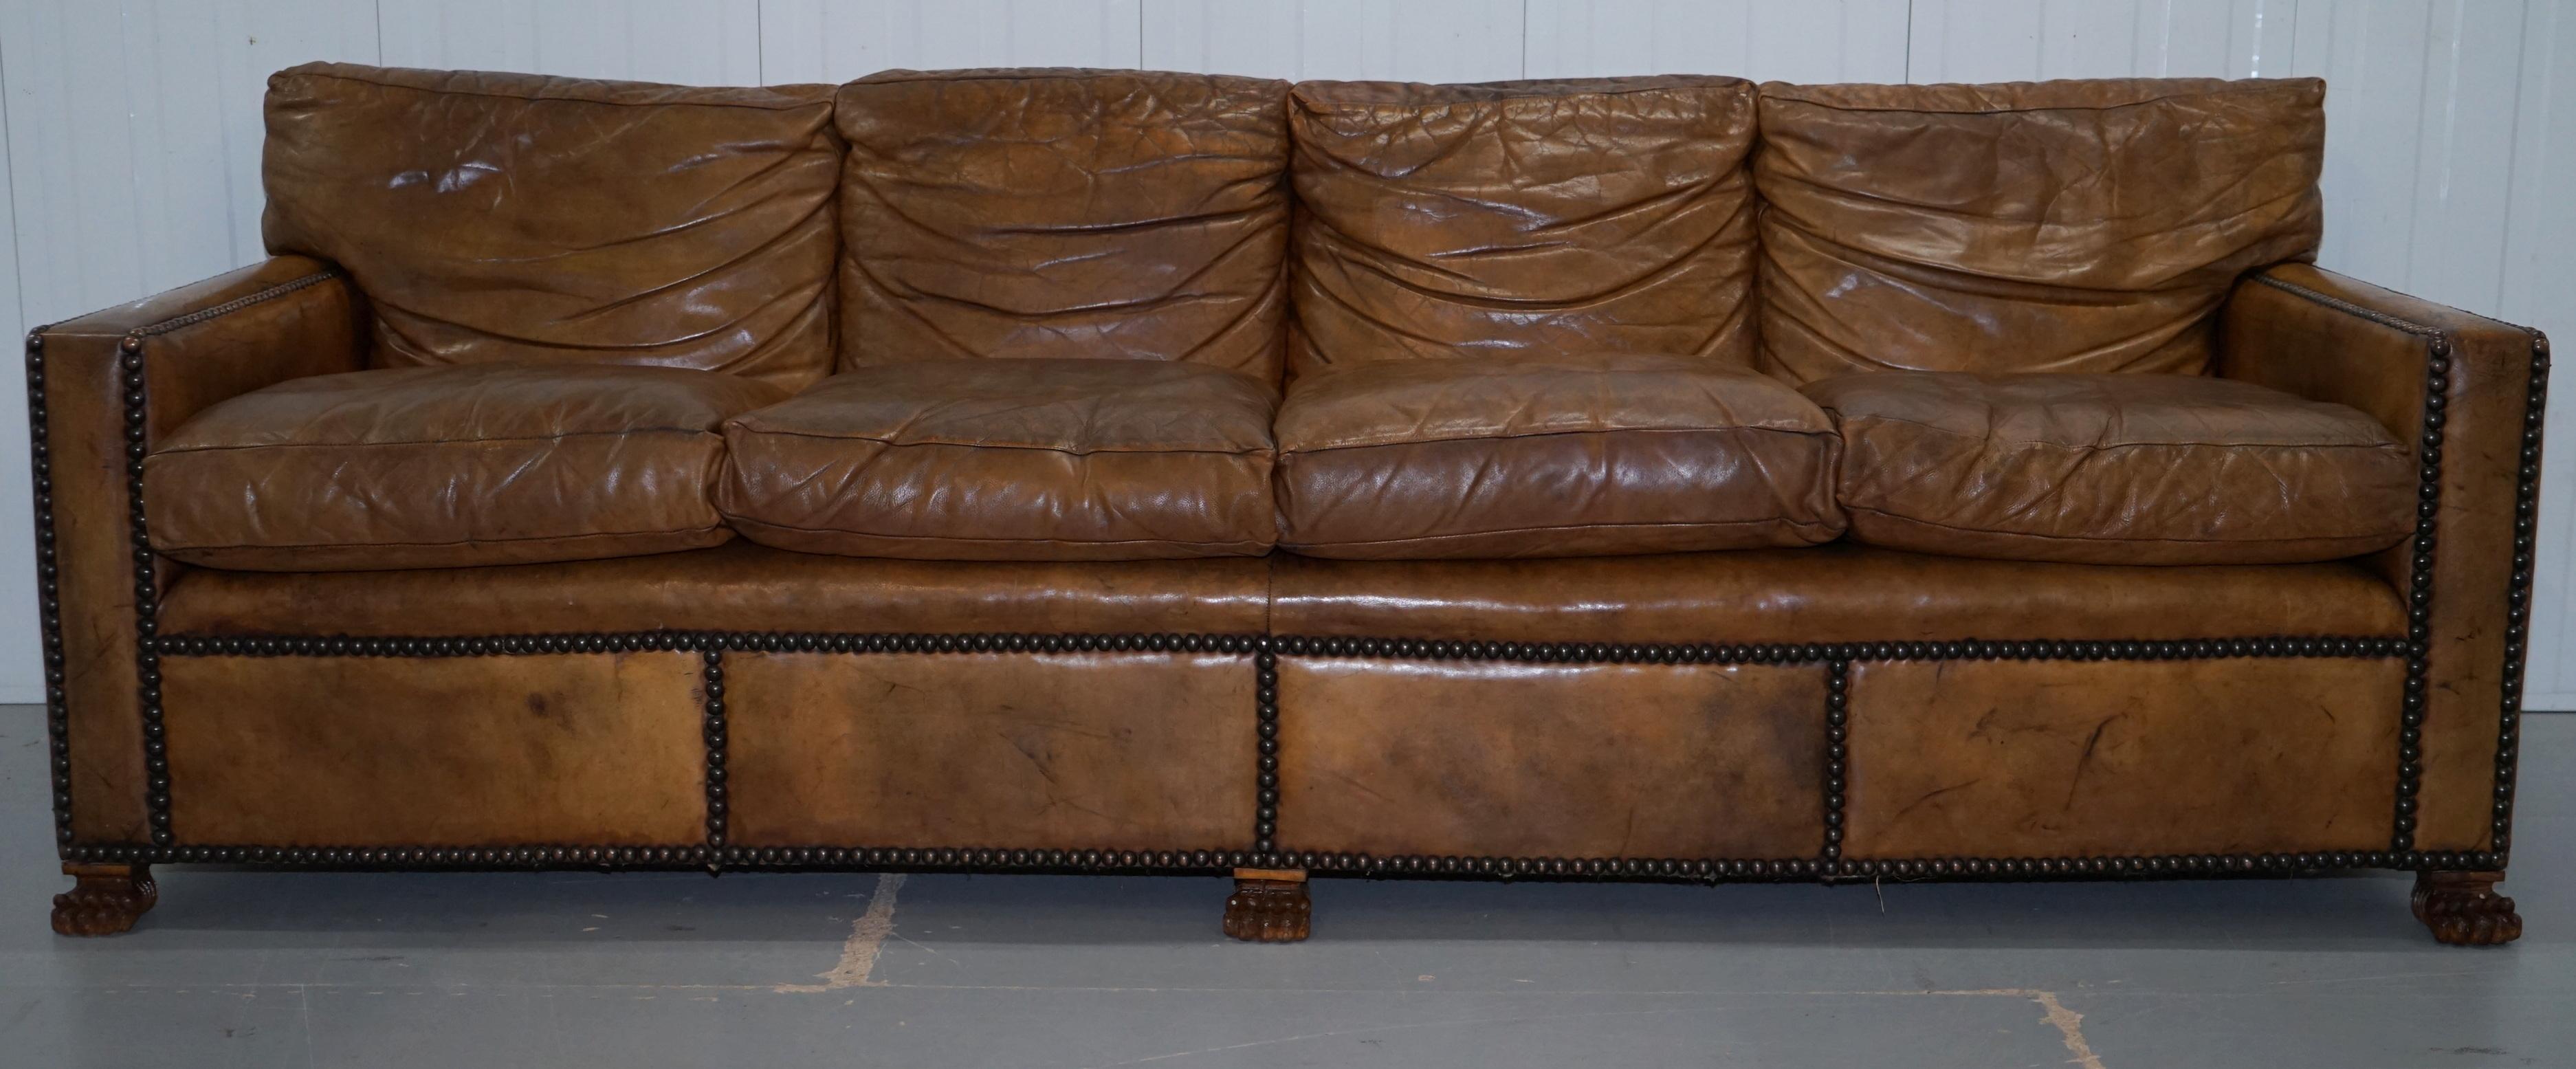 We are delighted to offer for sale this stunning aged tan brown leather Gentleman’s four-seat club sofa finished with lion hairy paw feet and with a great history

This piece is part of a suite, and with the original leather finish. 

These